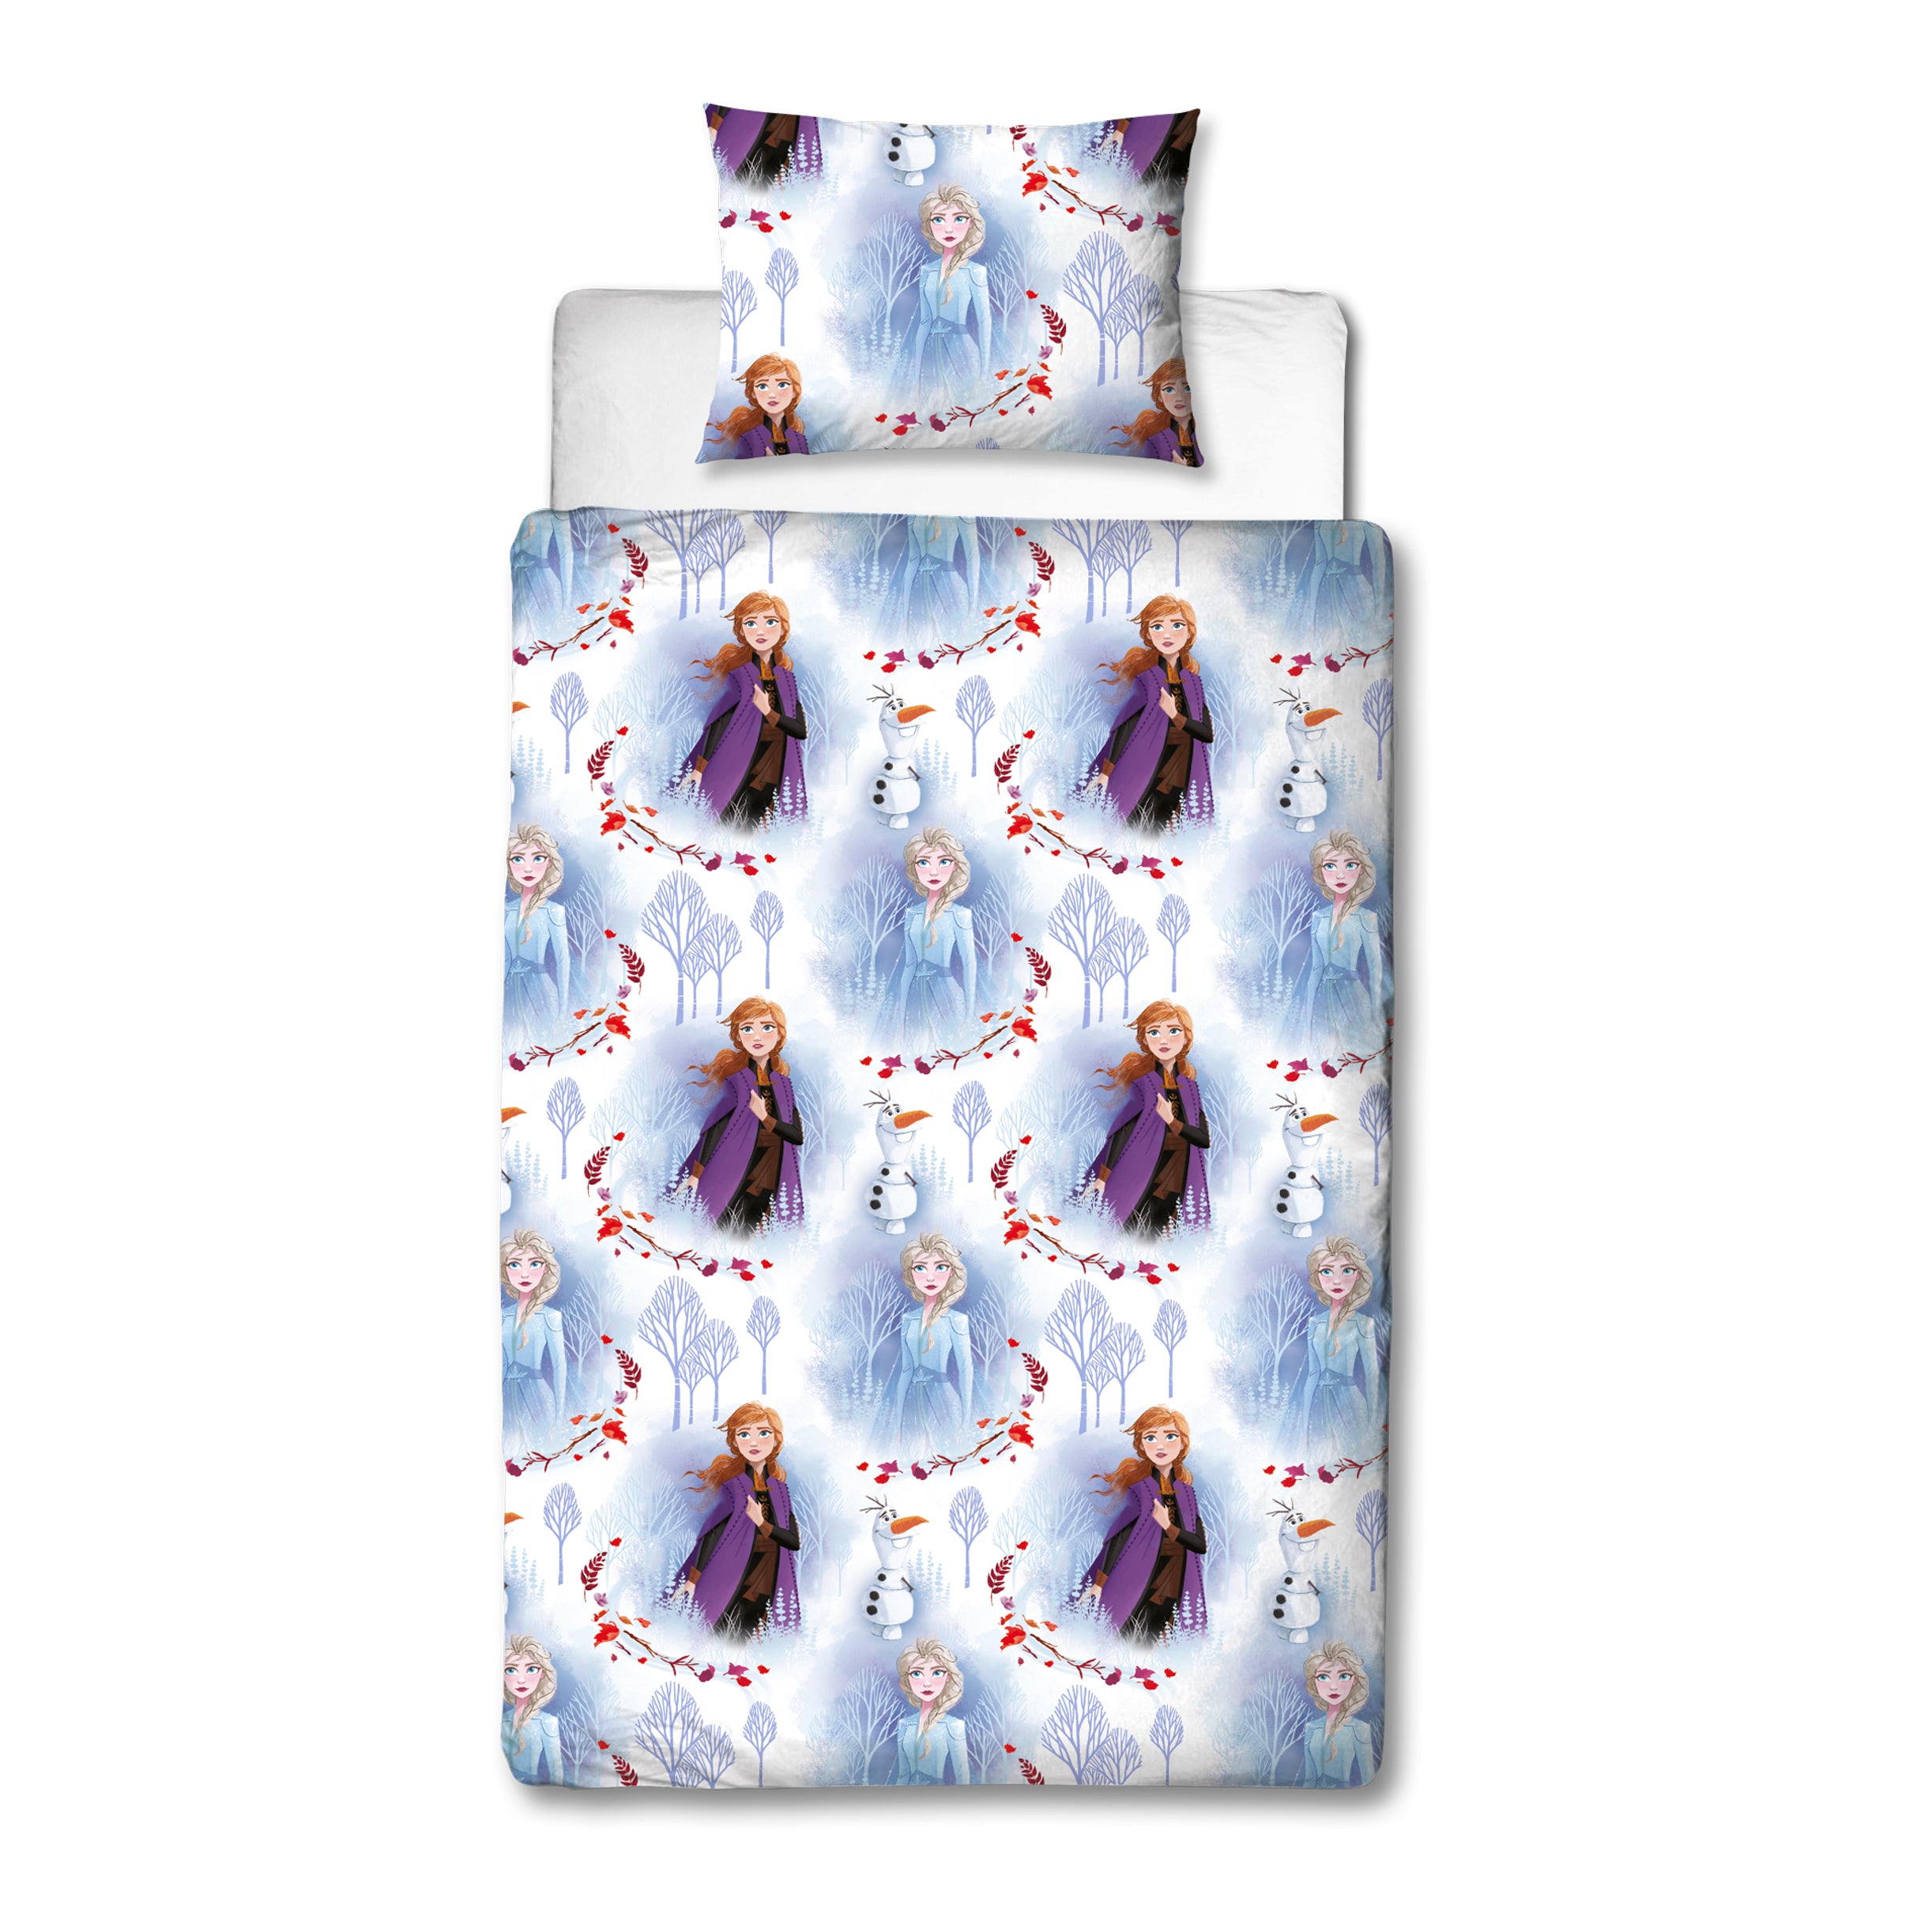 Frozen 2 Licensed Bed Covers